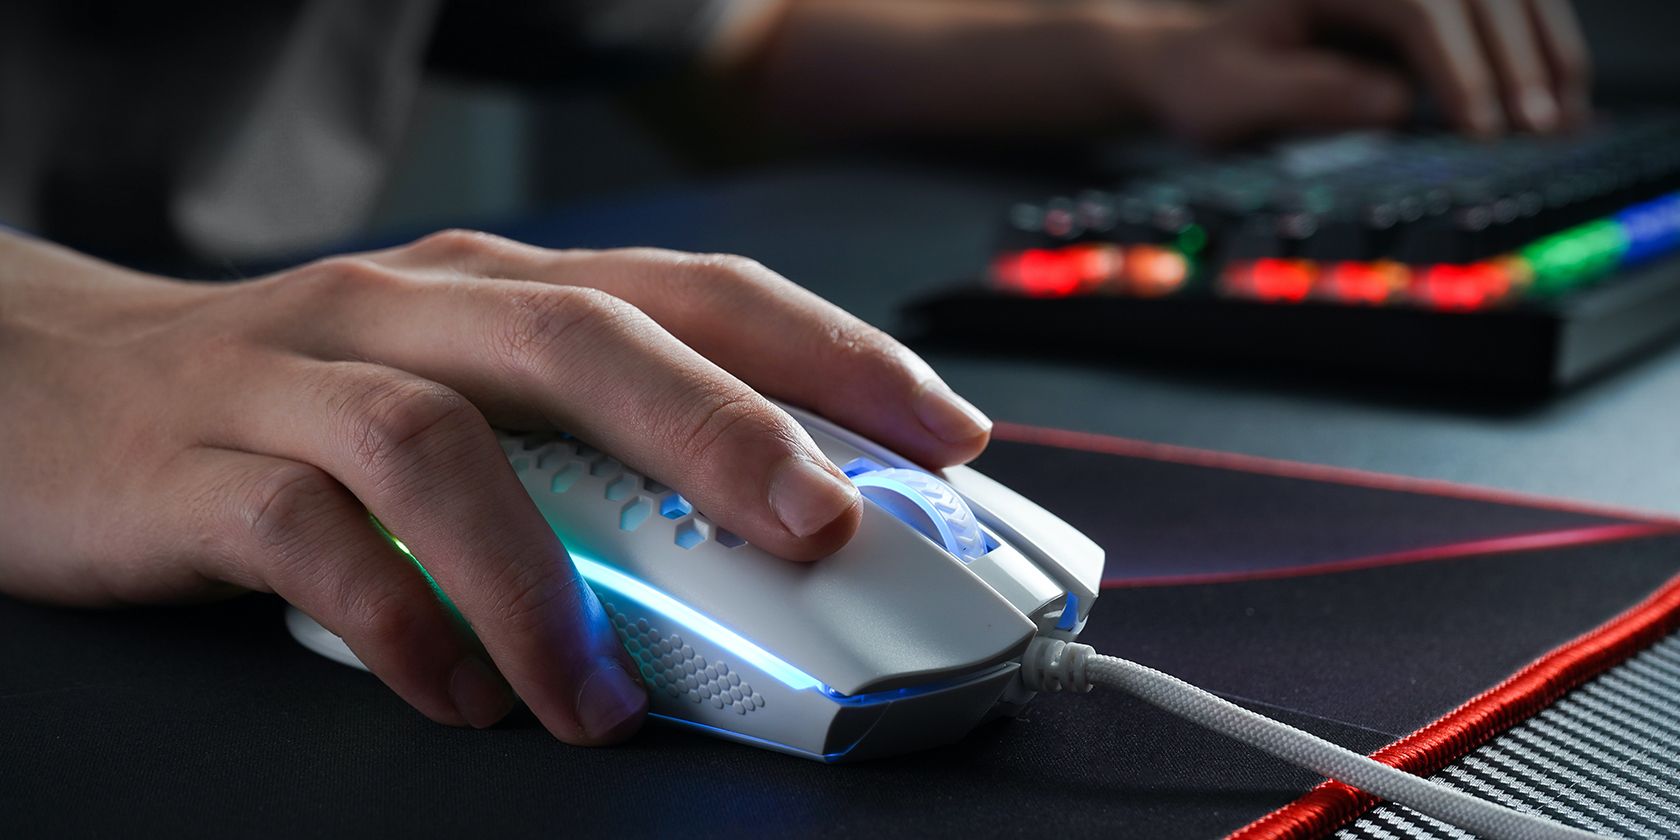 A gamer gripping his mouse atop a mouse pad